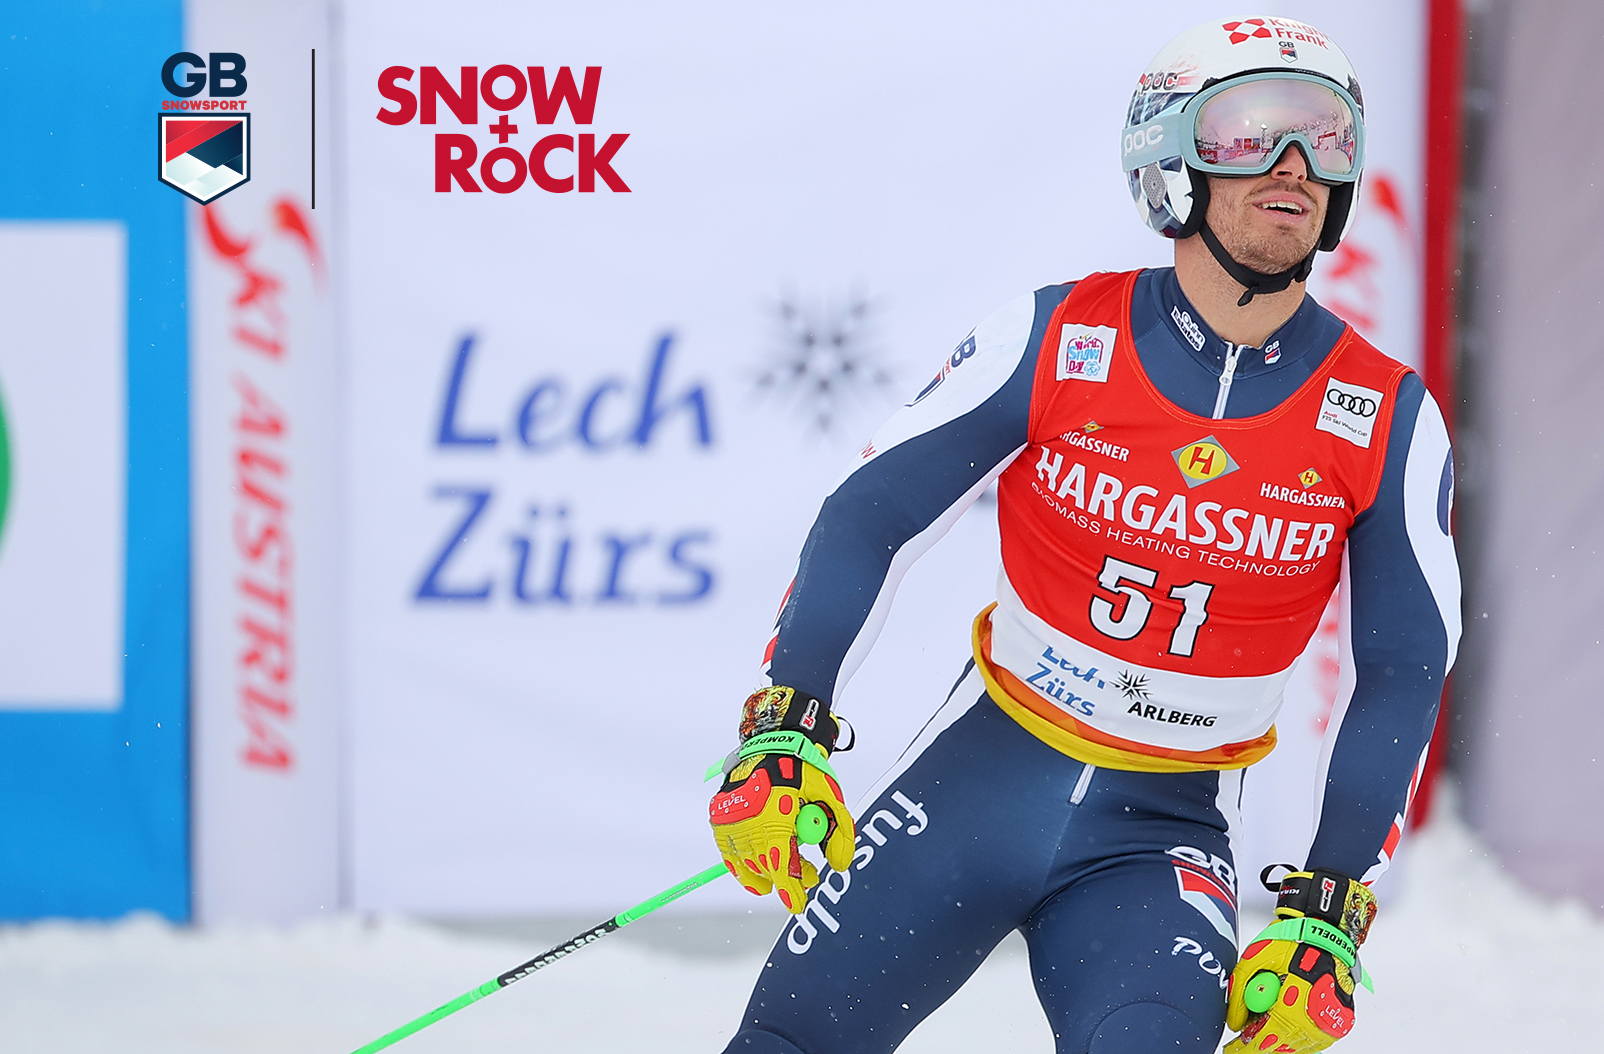 Raposo has World Cup lift off in Lech / Zuers